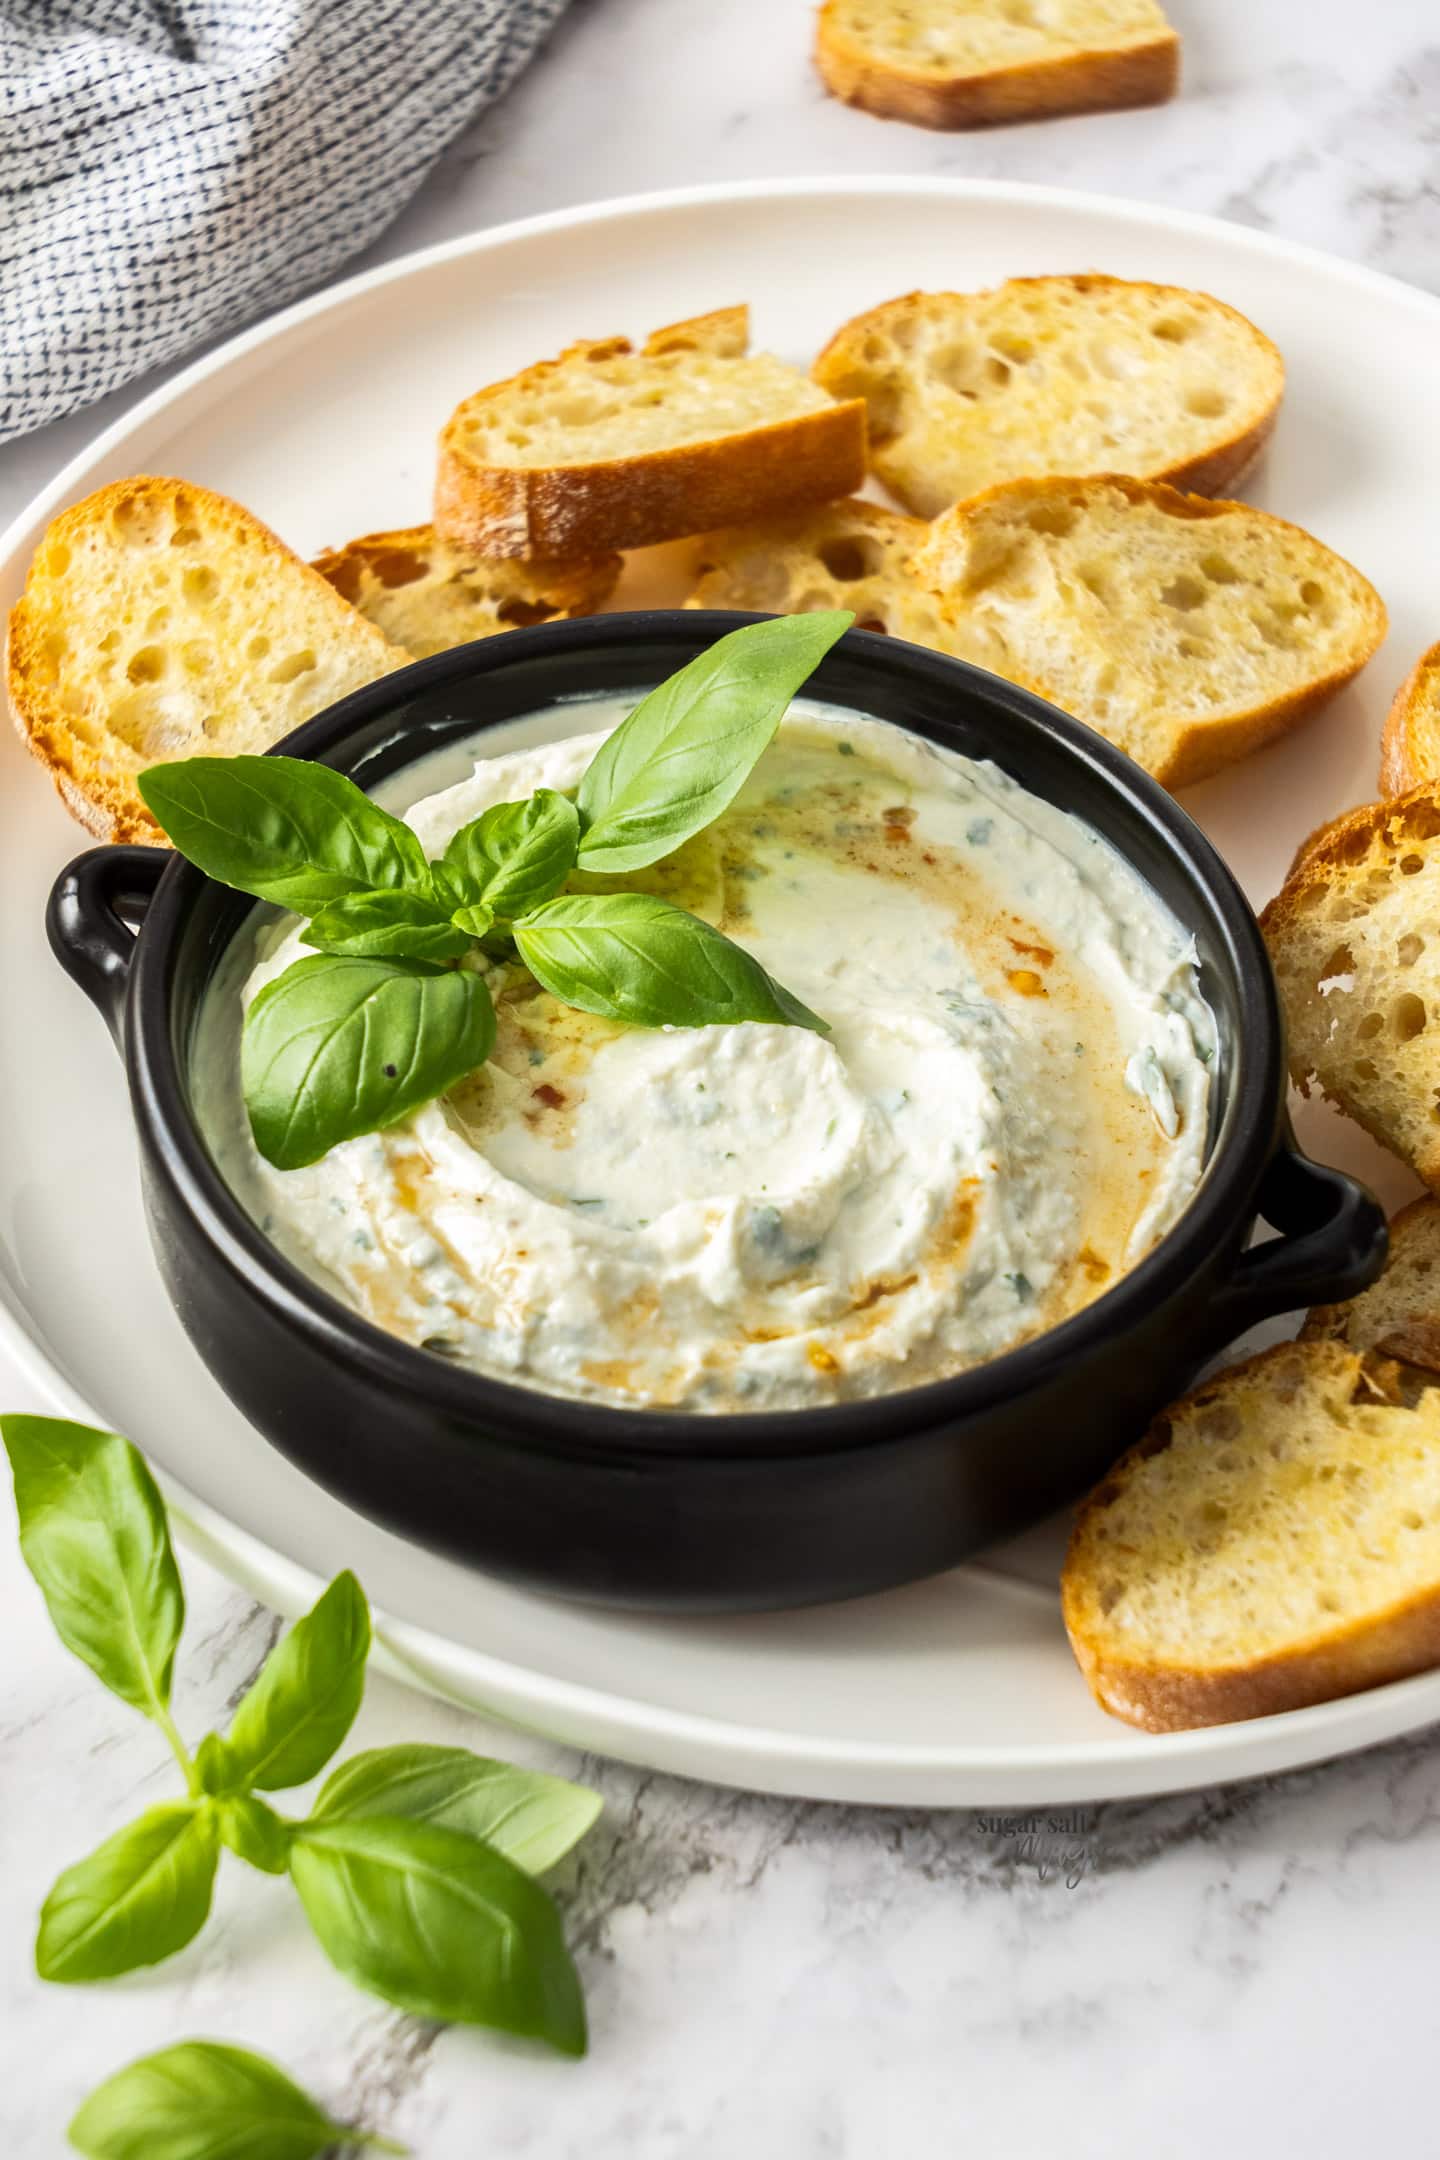 A bowl of ricotta dip surrounded by toasted bread.